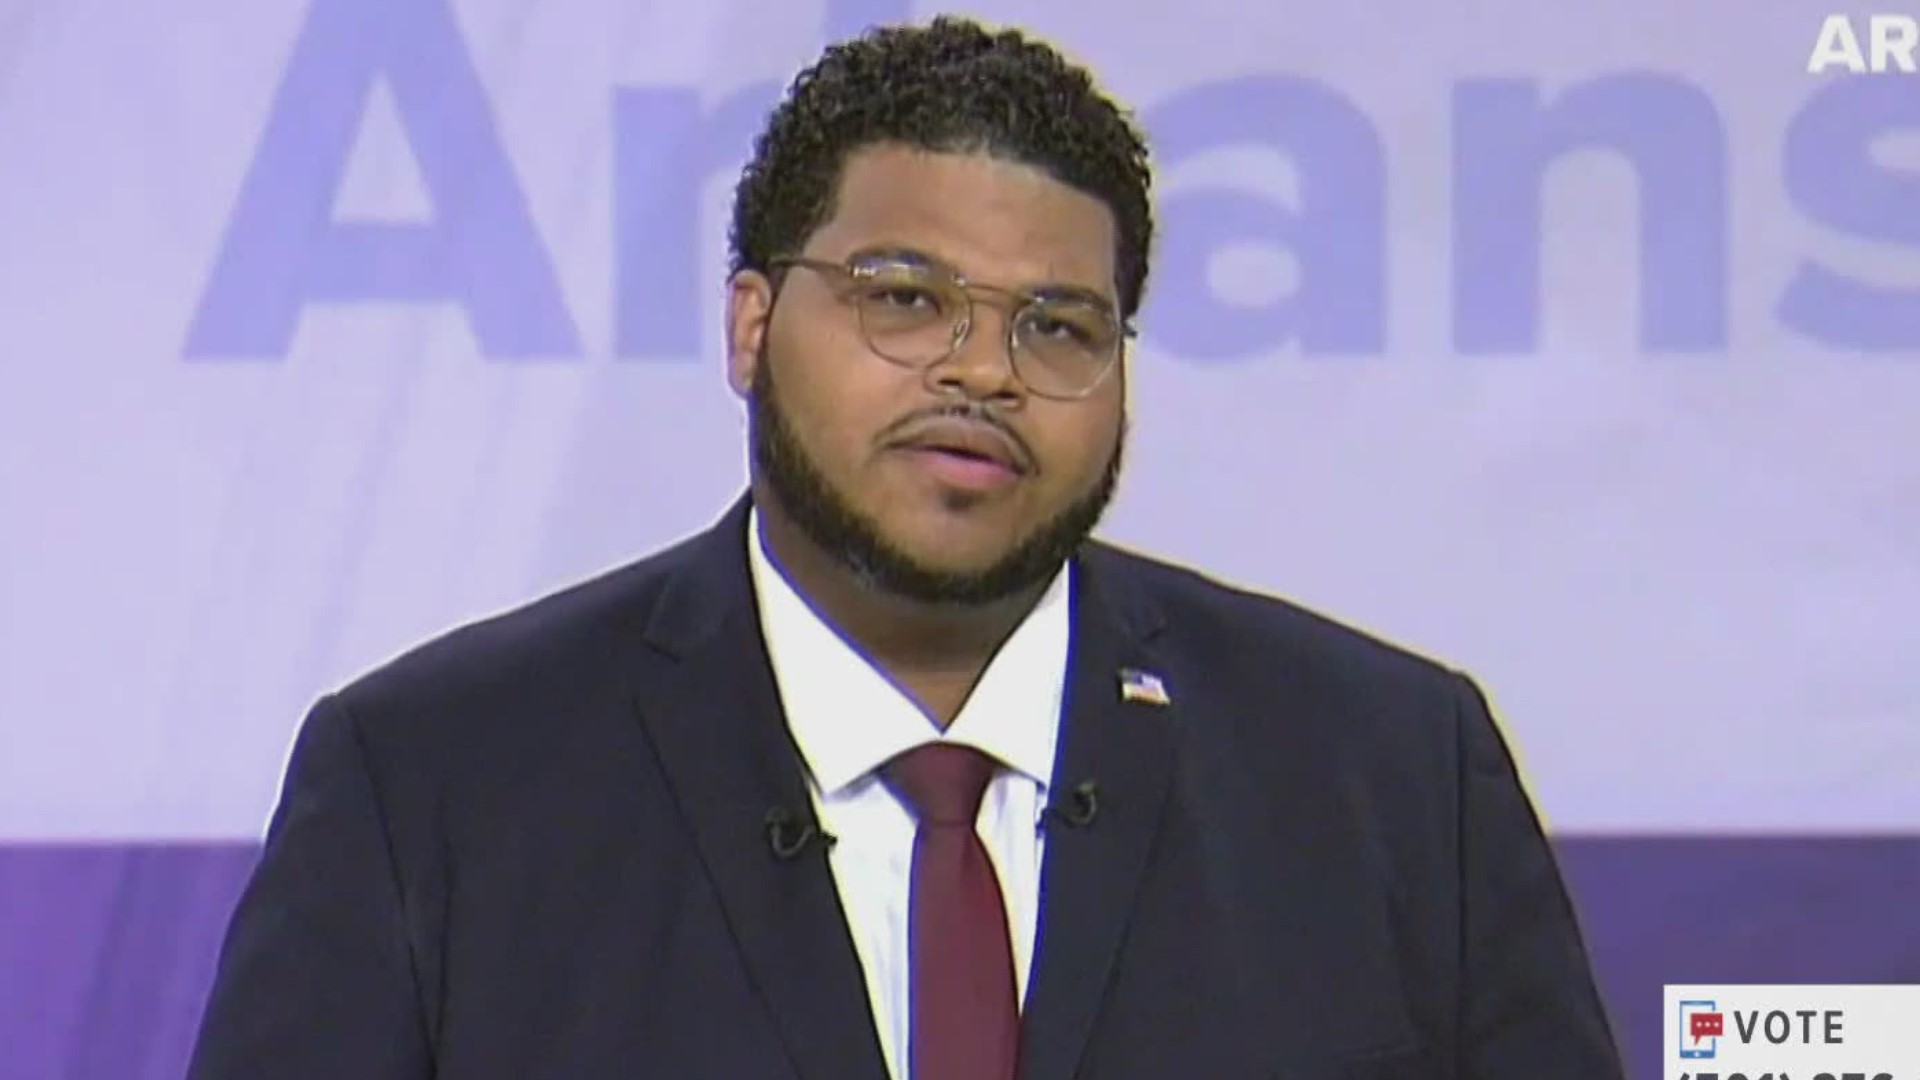 Libertarian challenger Ricky Dale Harrington said he'd "work for the people" if he defeats Sen. Tom Cotton during a debate. The senator declined to attend the debate